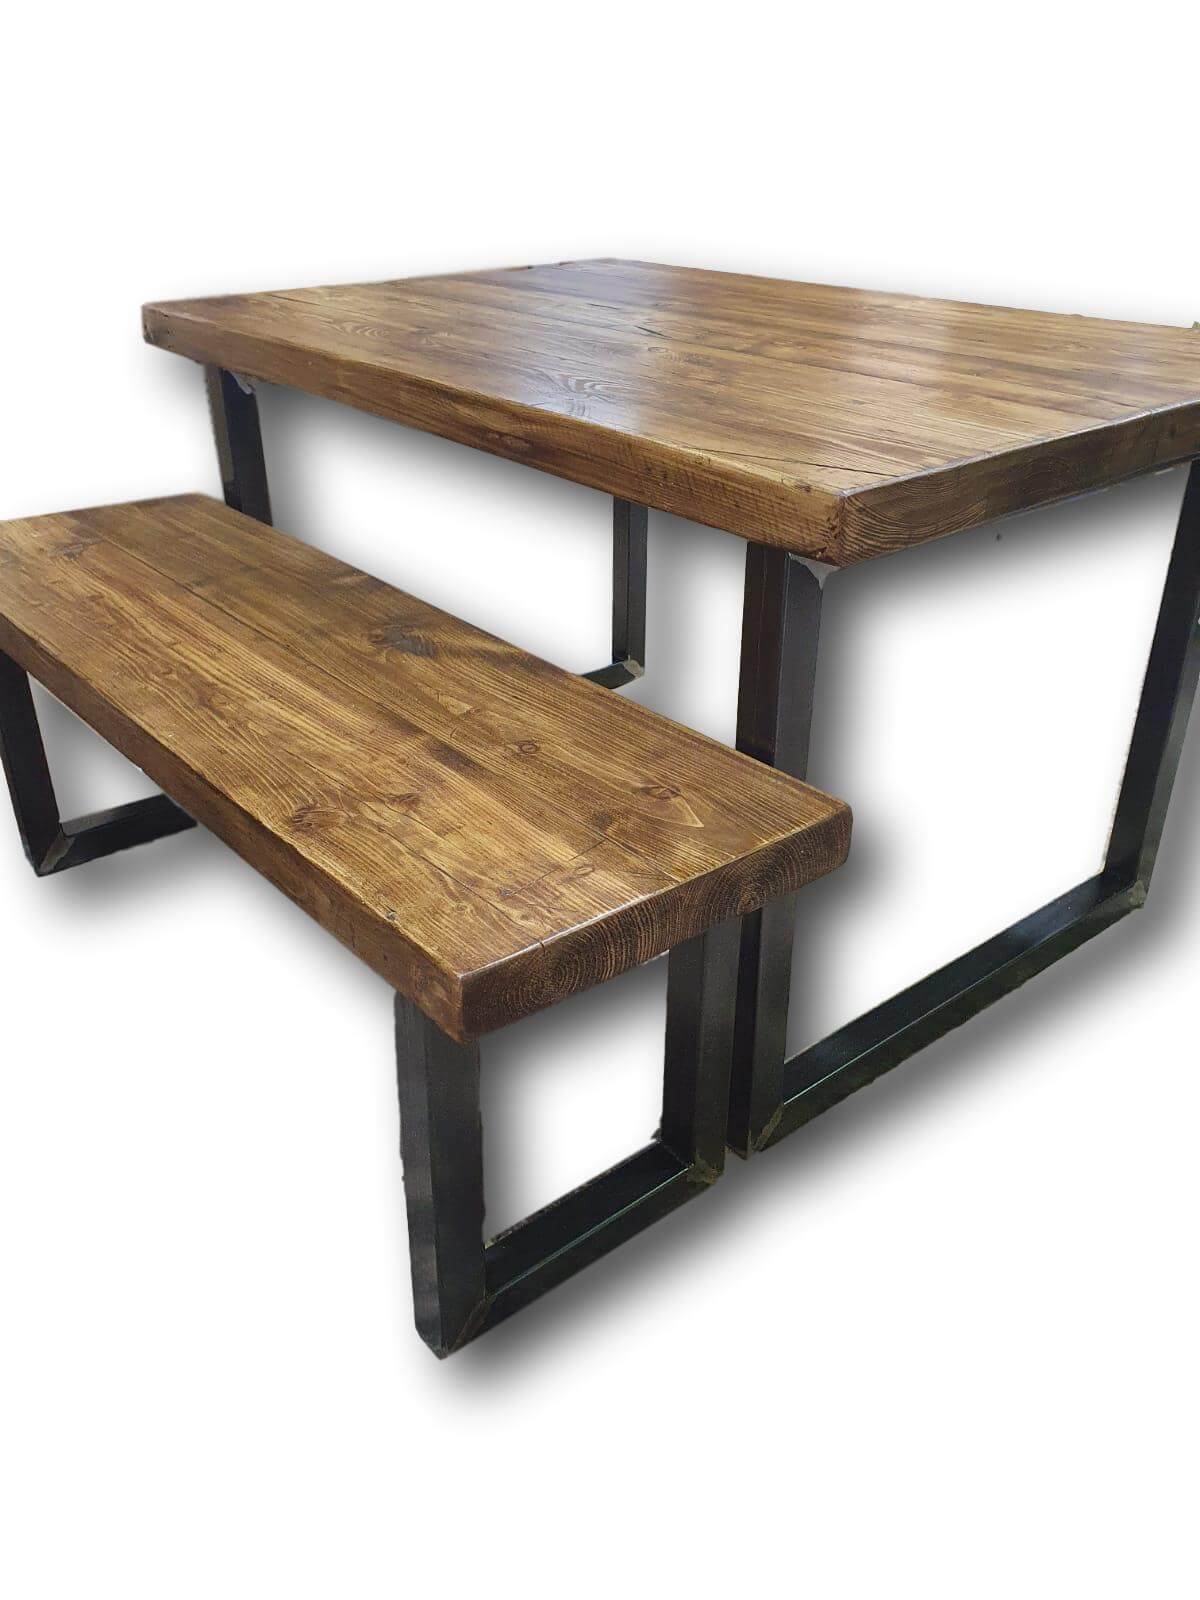 The 65mm Reclaimed Rustic Weathered Table - Oil Finish (4632992907319)